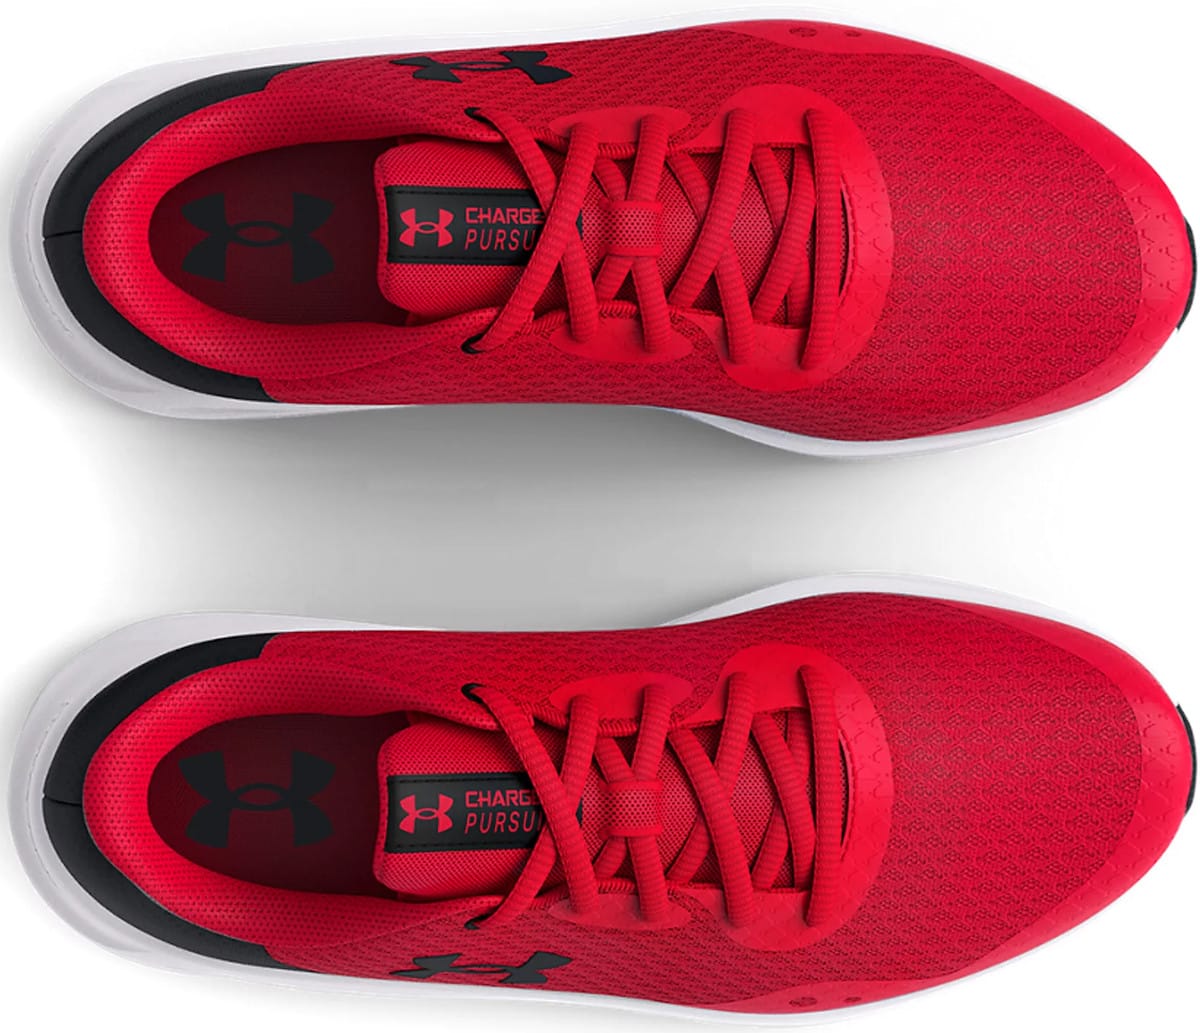 UNDER ARMOUR CHARGED PURSUIT 3 GS